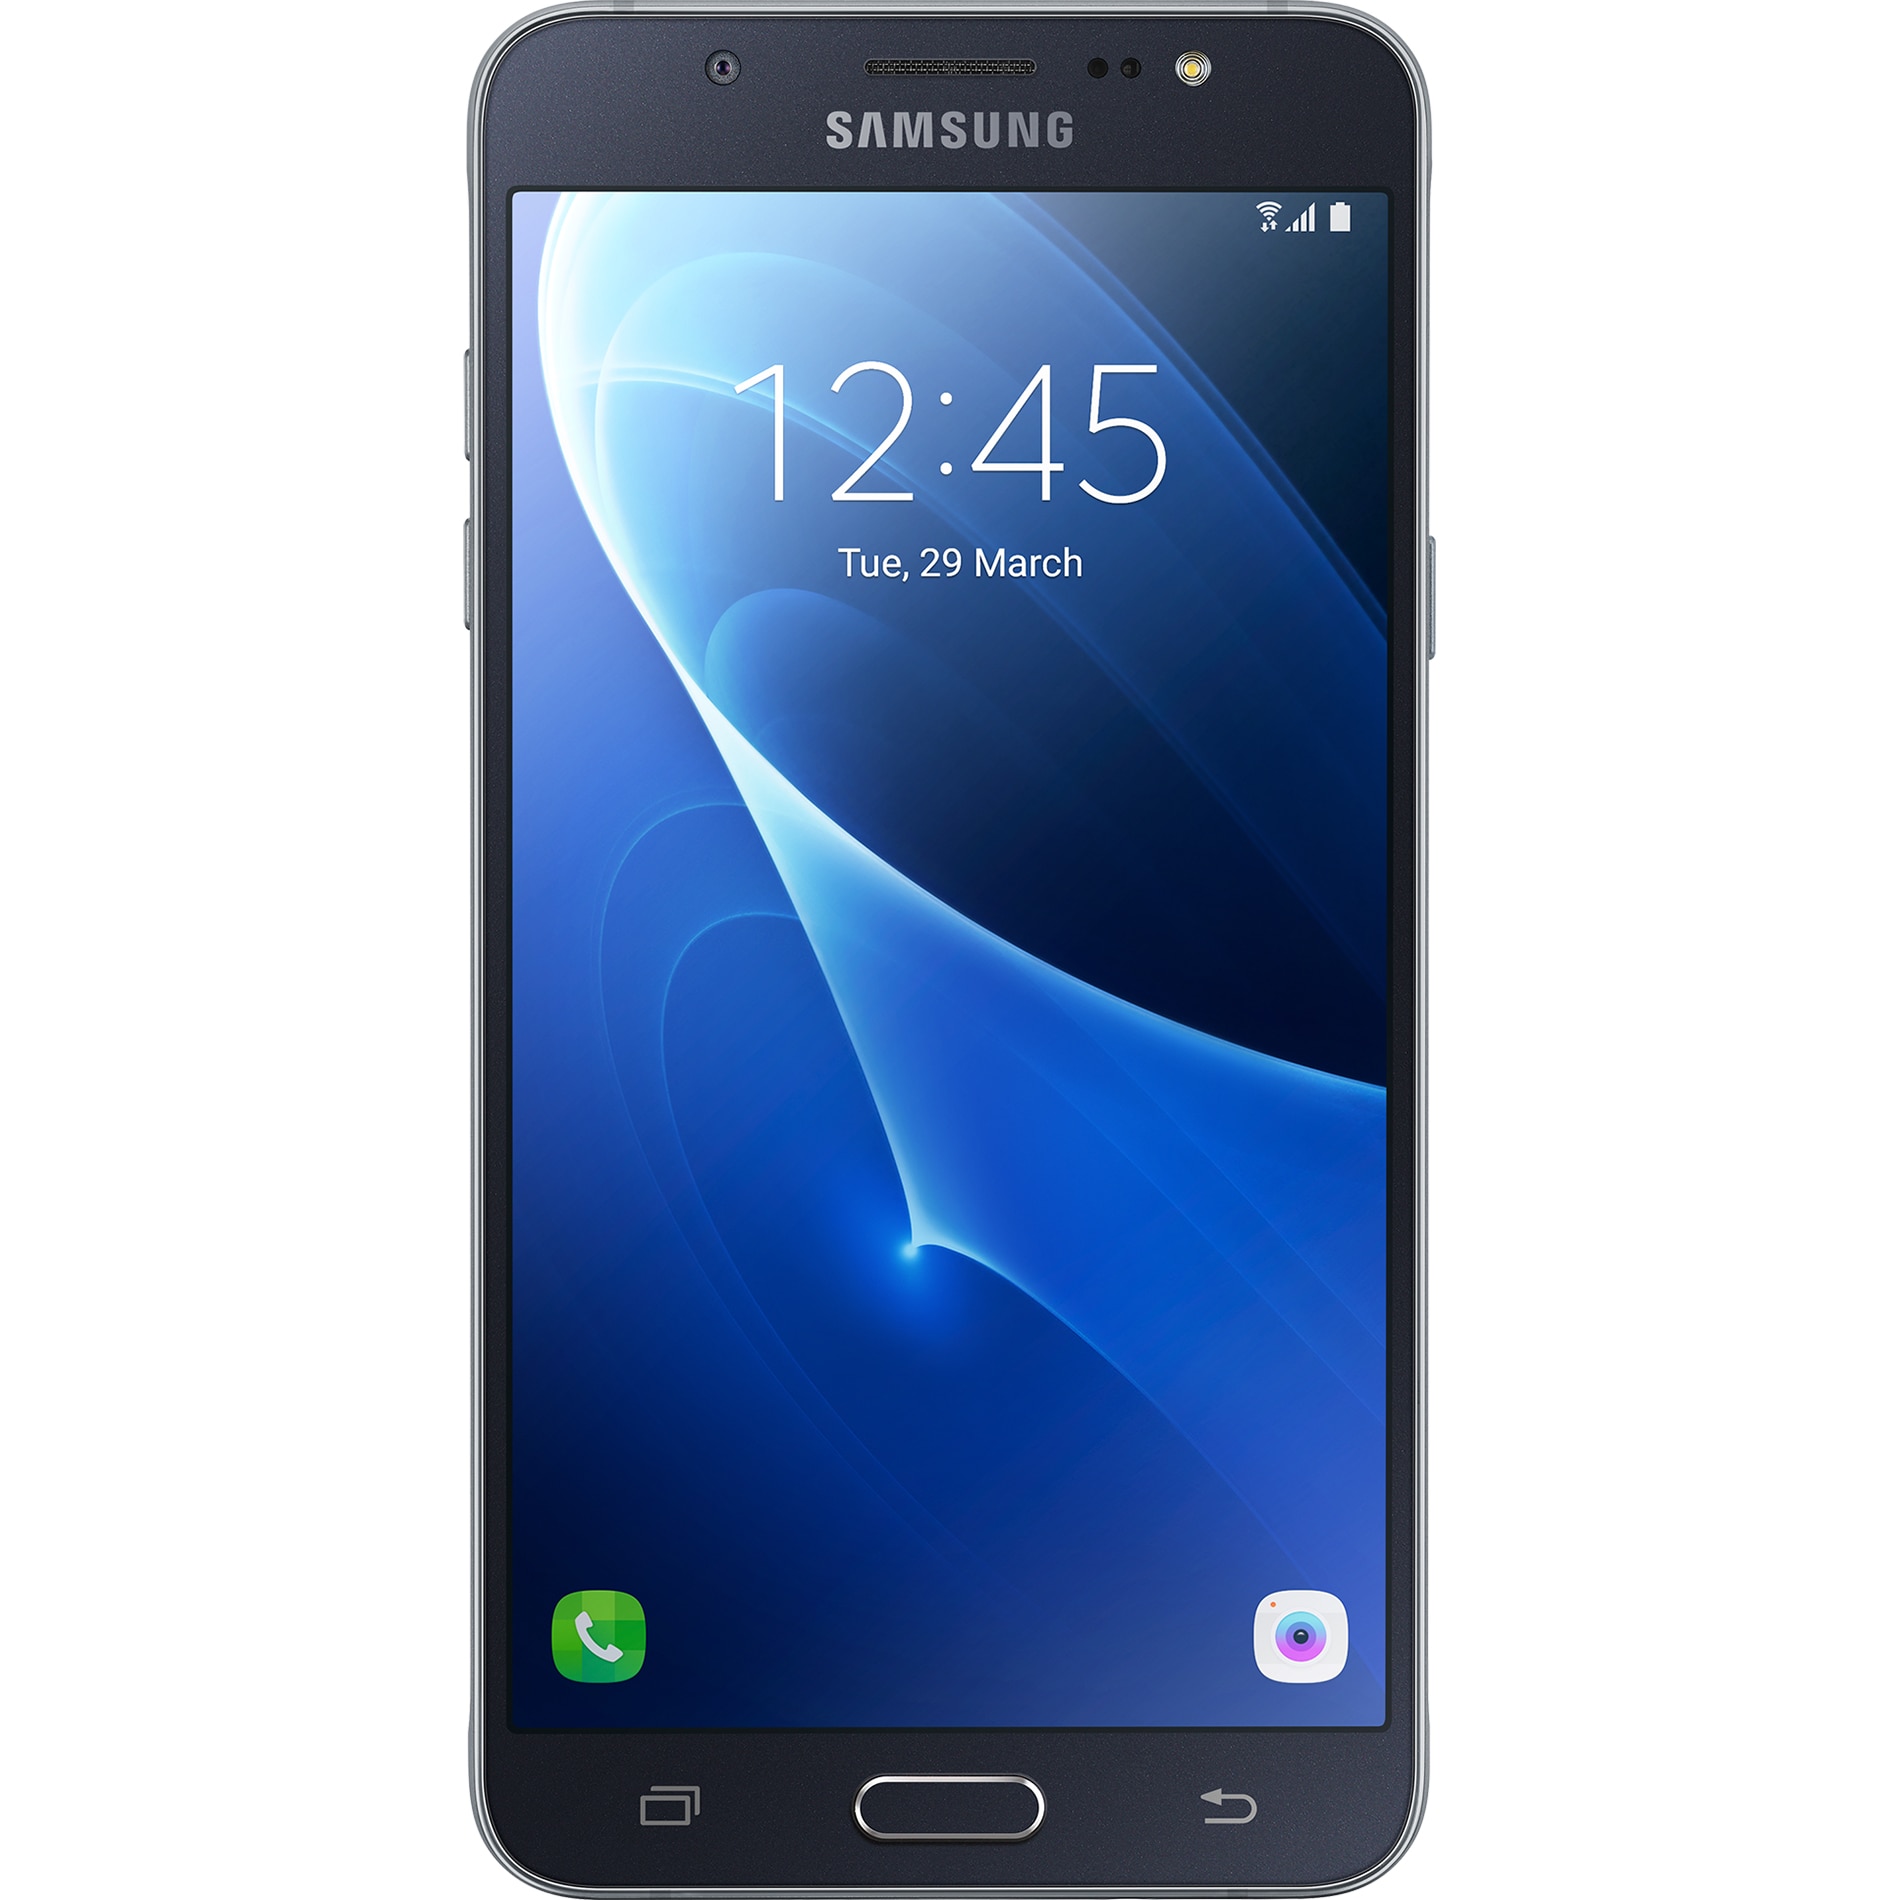 Agriculture stock Can withstand Telefon mobil Samsung Galaxy J5 (2016), 16GB, 4G, Black - eMAG.ro